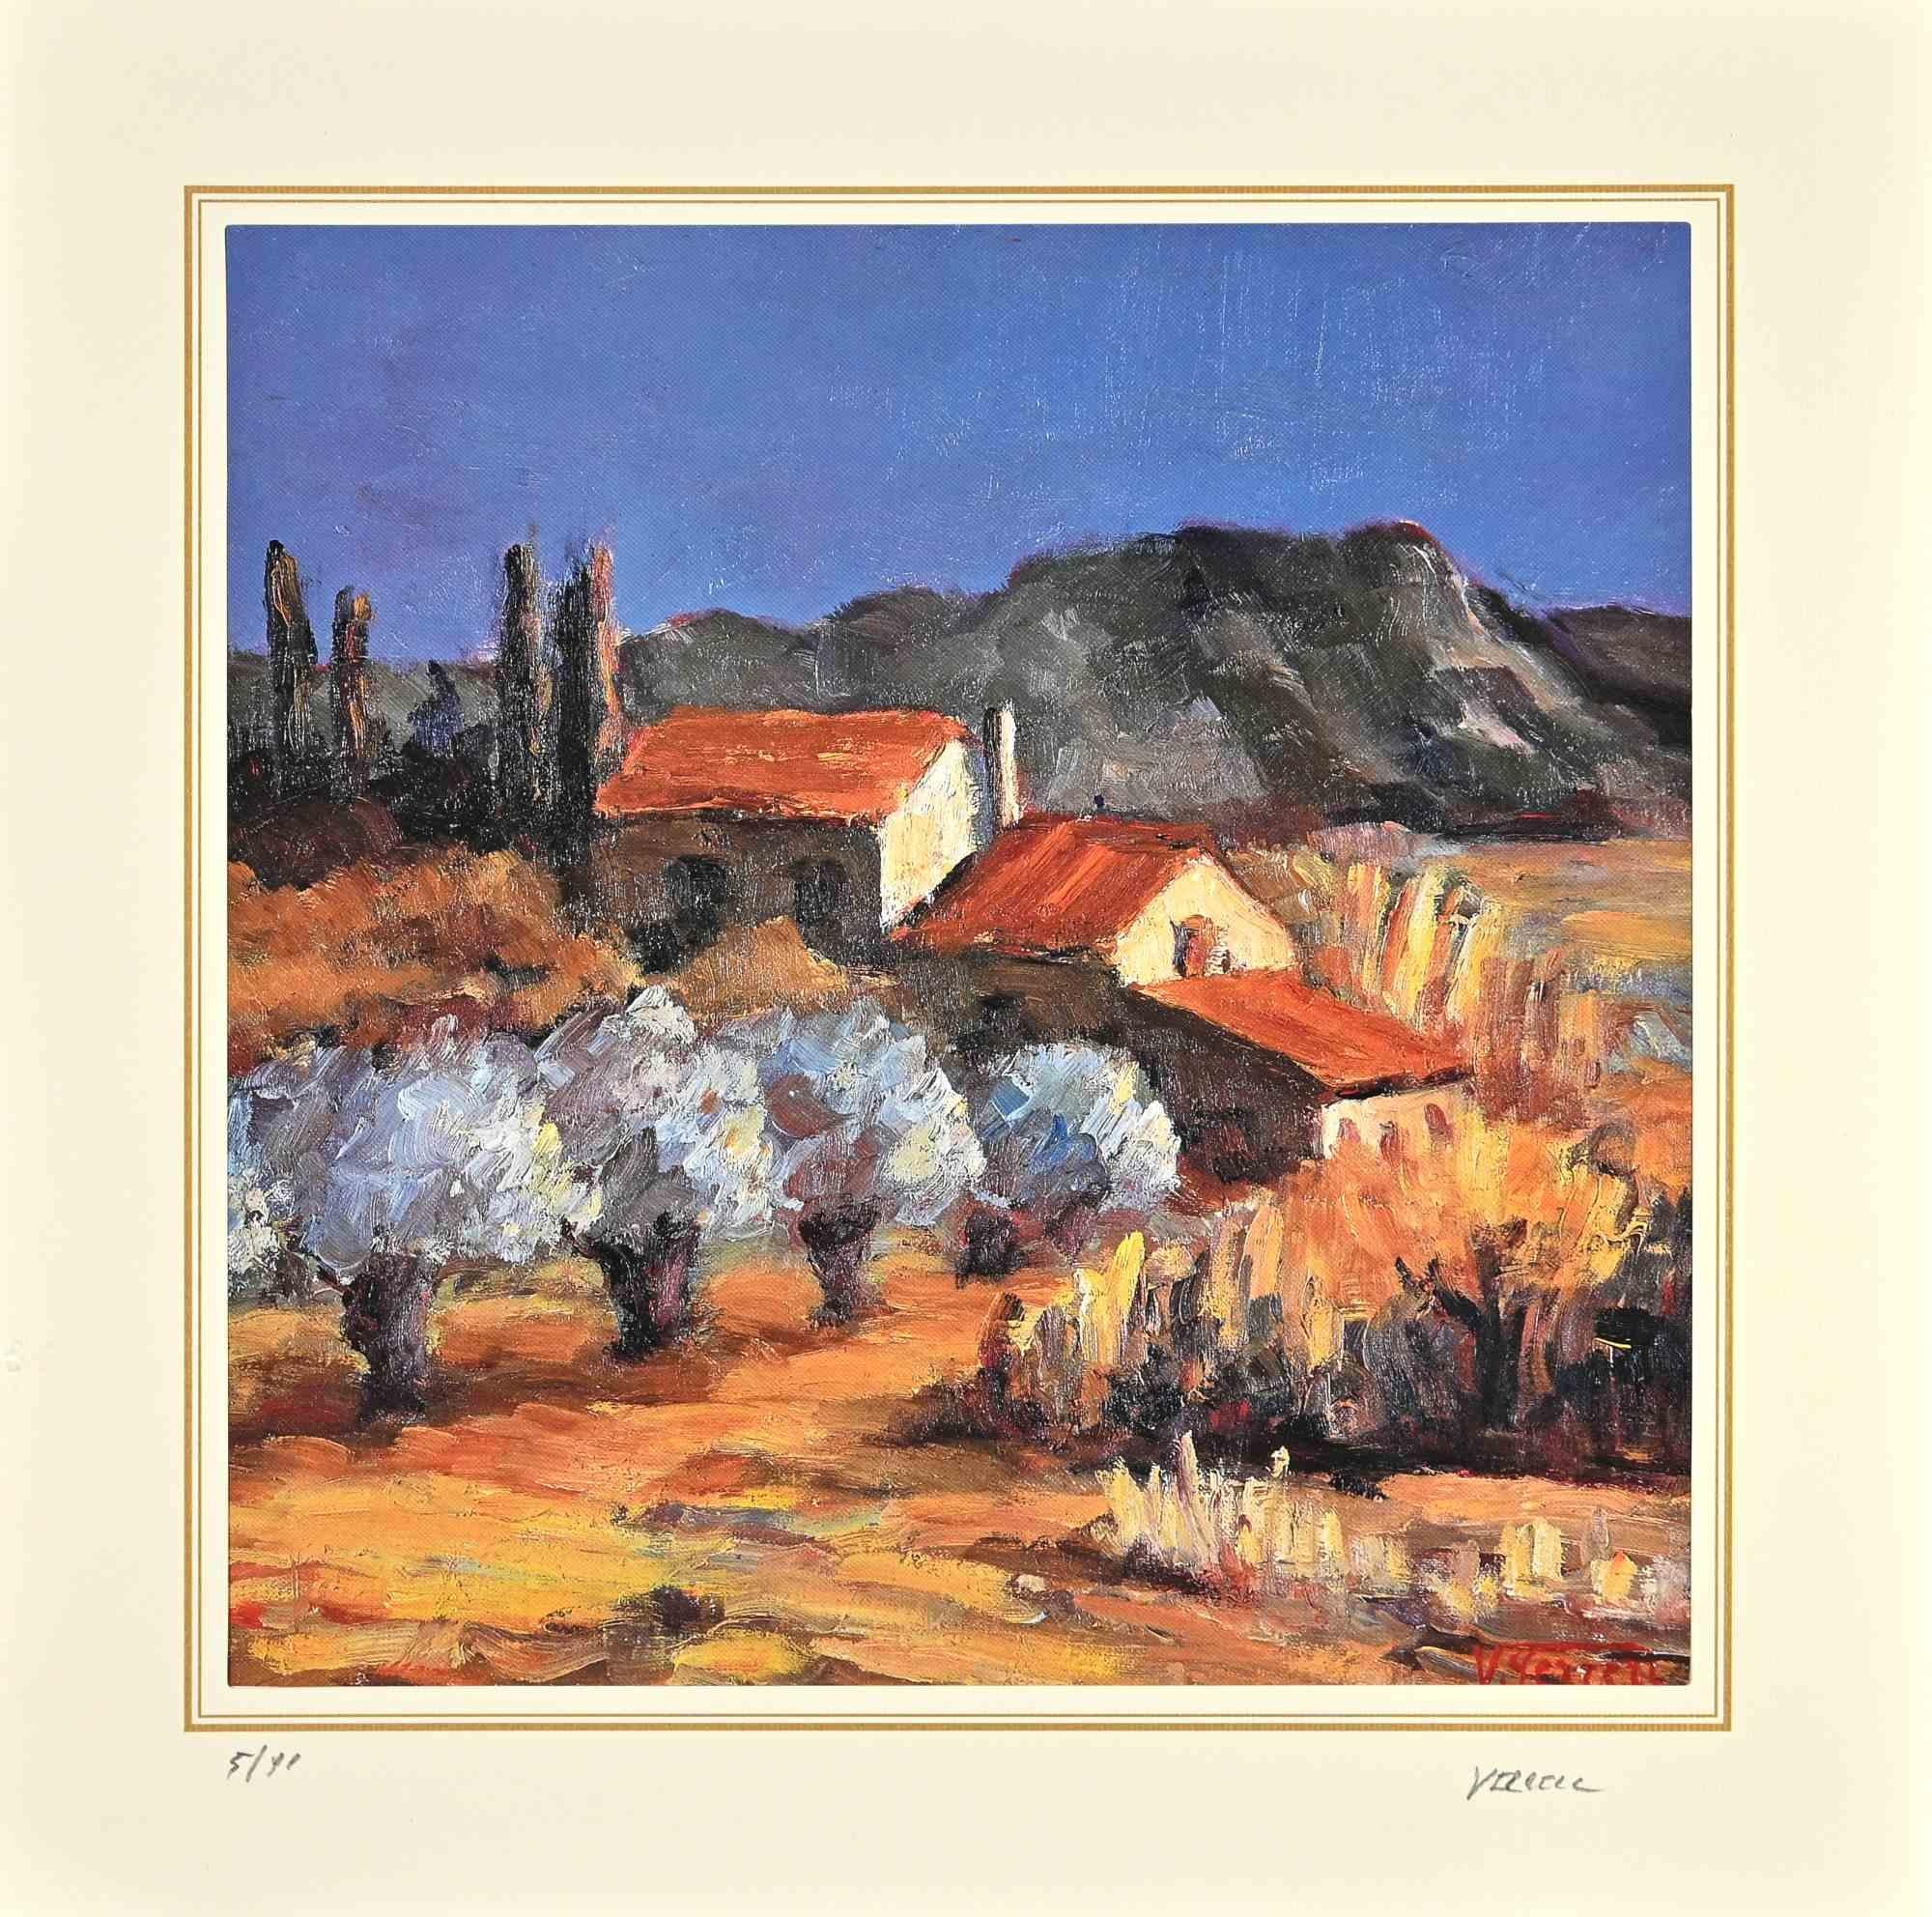 Landscape is a lithograph attributed to Nicholas Verrall (1945) in the Late 20th Century.

Hand-signed on the right corner. Numbered, Edition, 5/99, on the left margin. On the back is the label of the certificate of  authenticity.

The artwork is